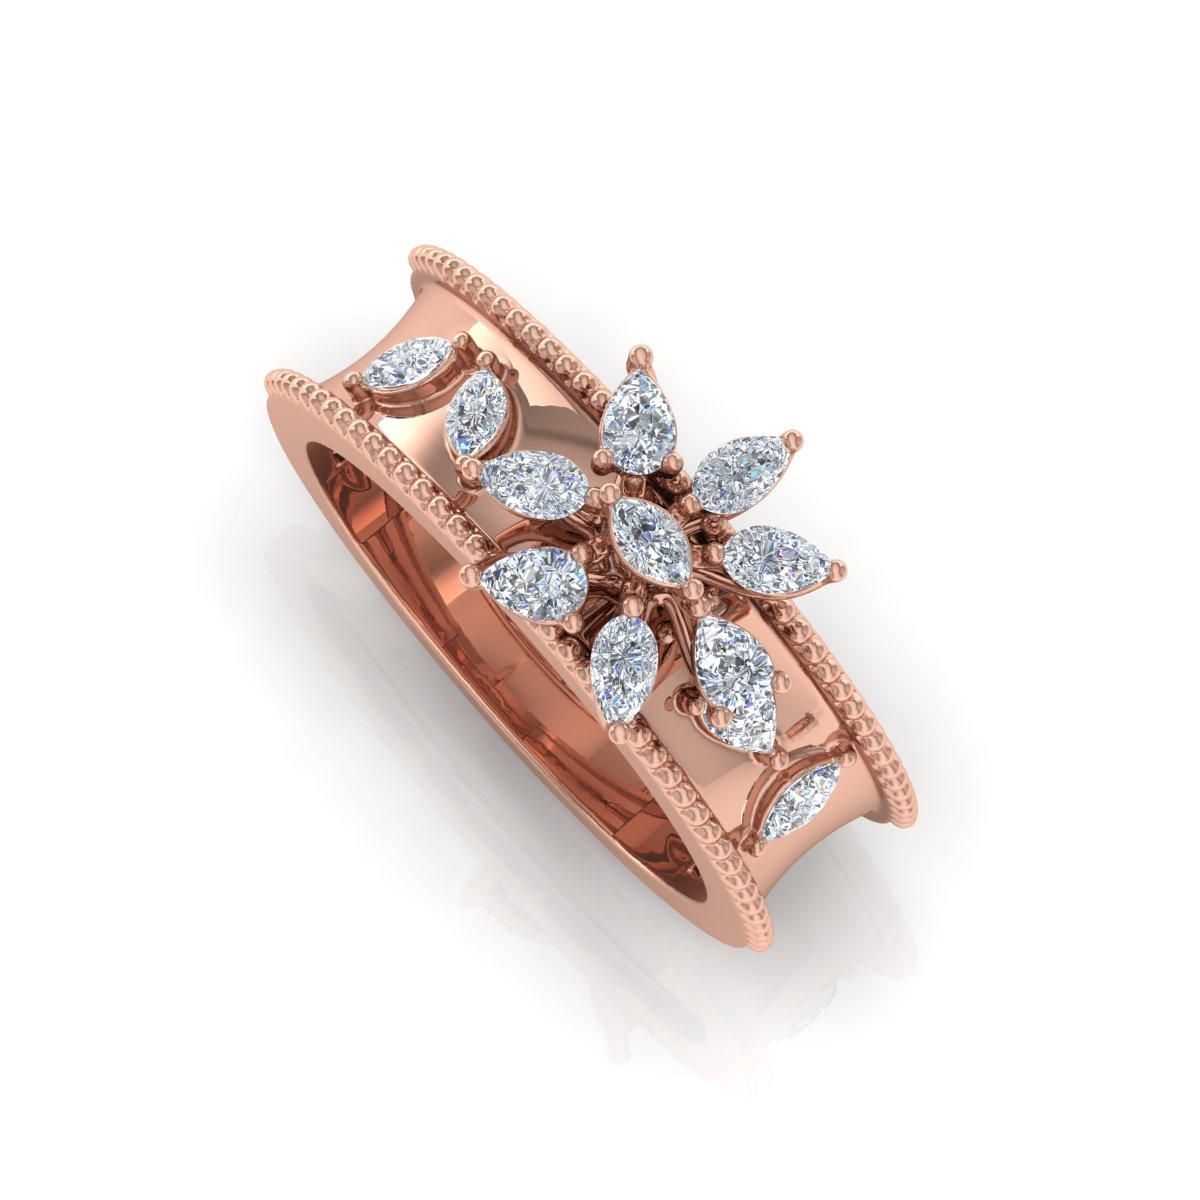 For Sale:  0.70 Carat Pear Marquise Diamond Band Ring Solid 18k Rose Gold Handmade Jewelry 6